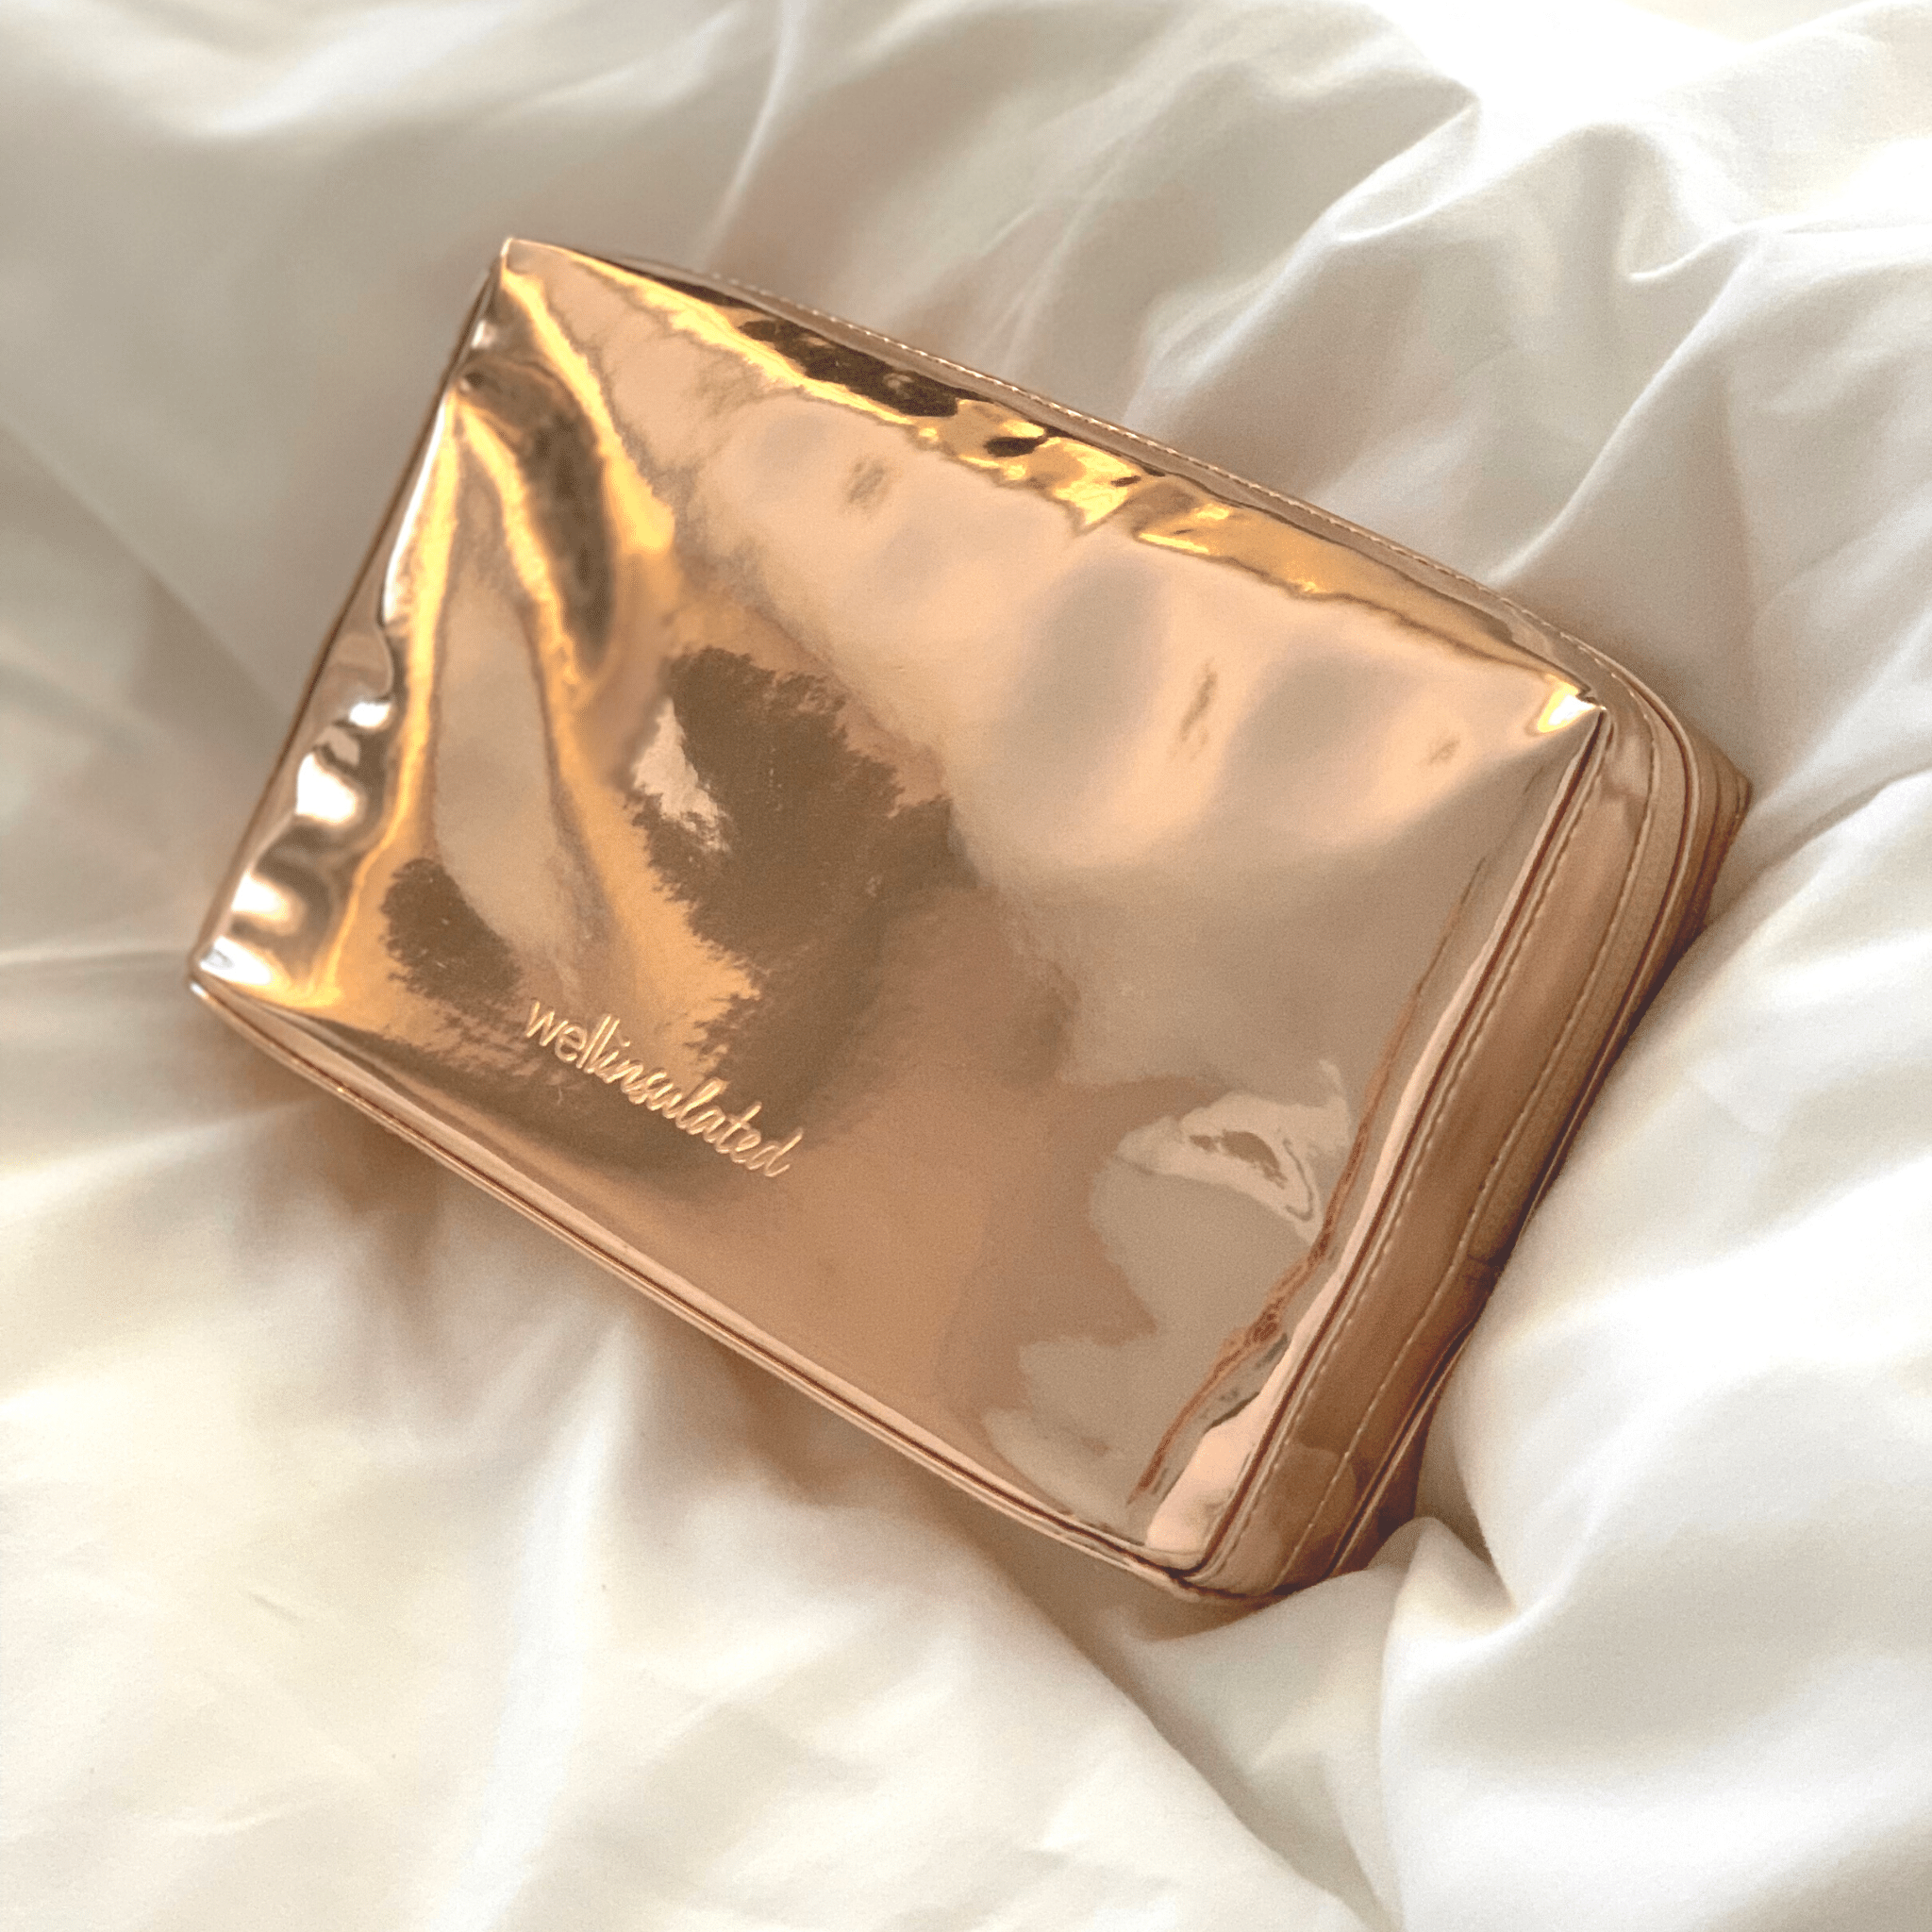 Wellinsulated Performance Beauty Bag Rose Gold